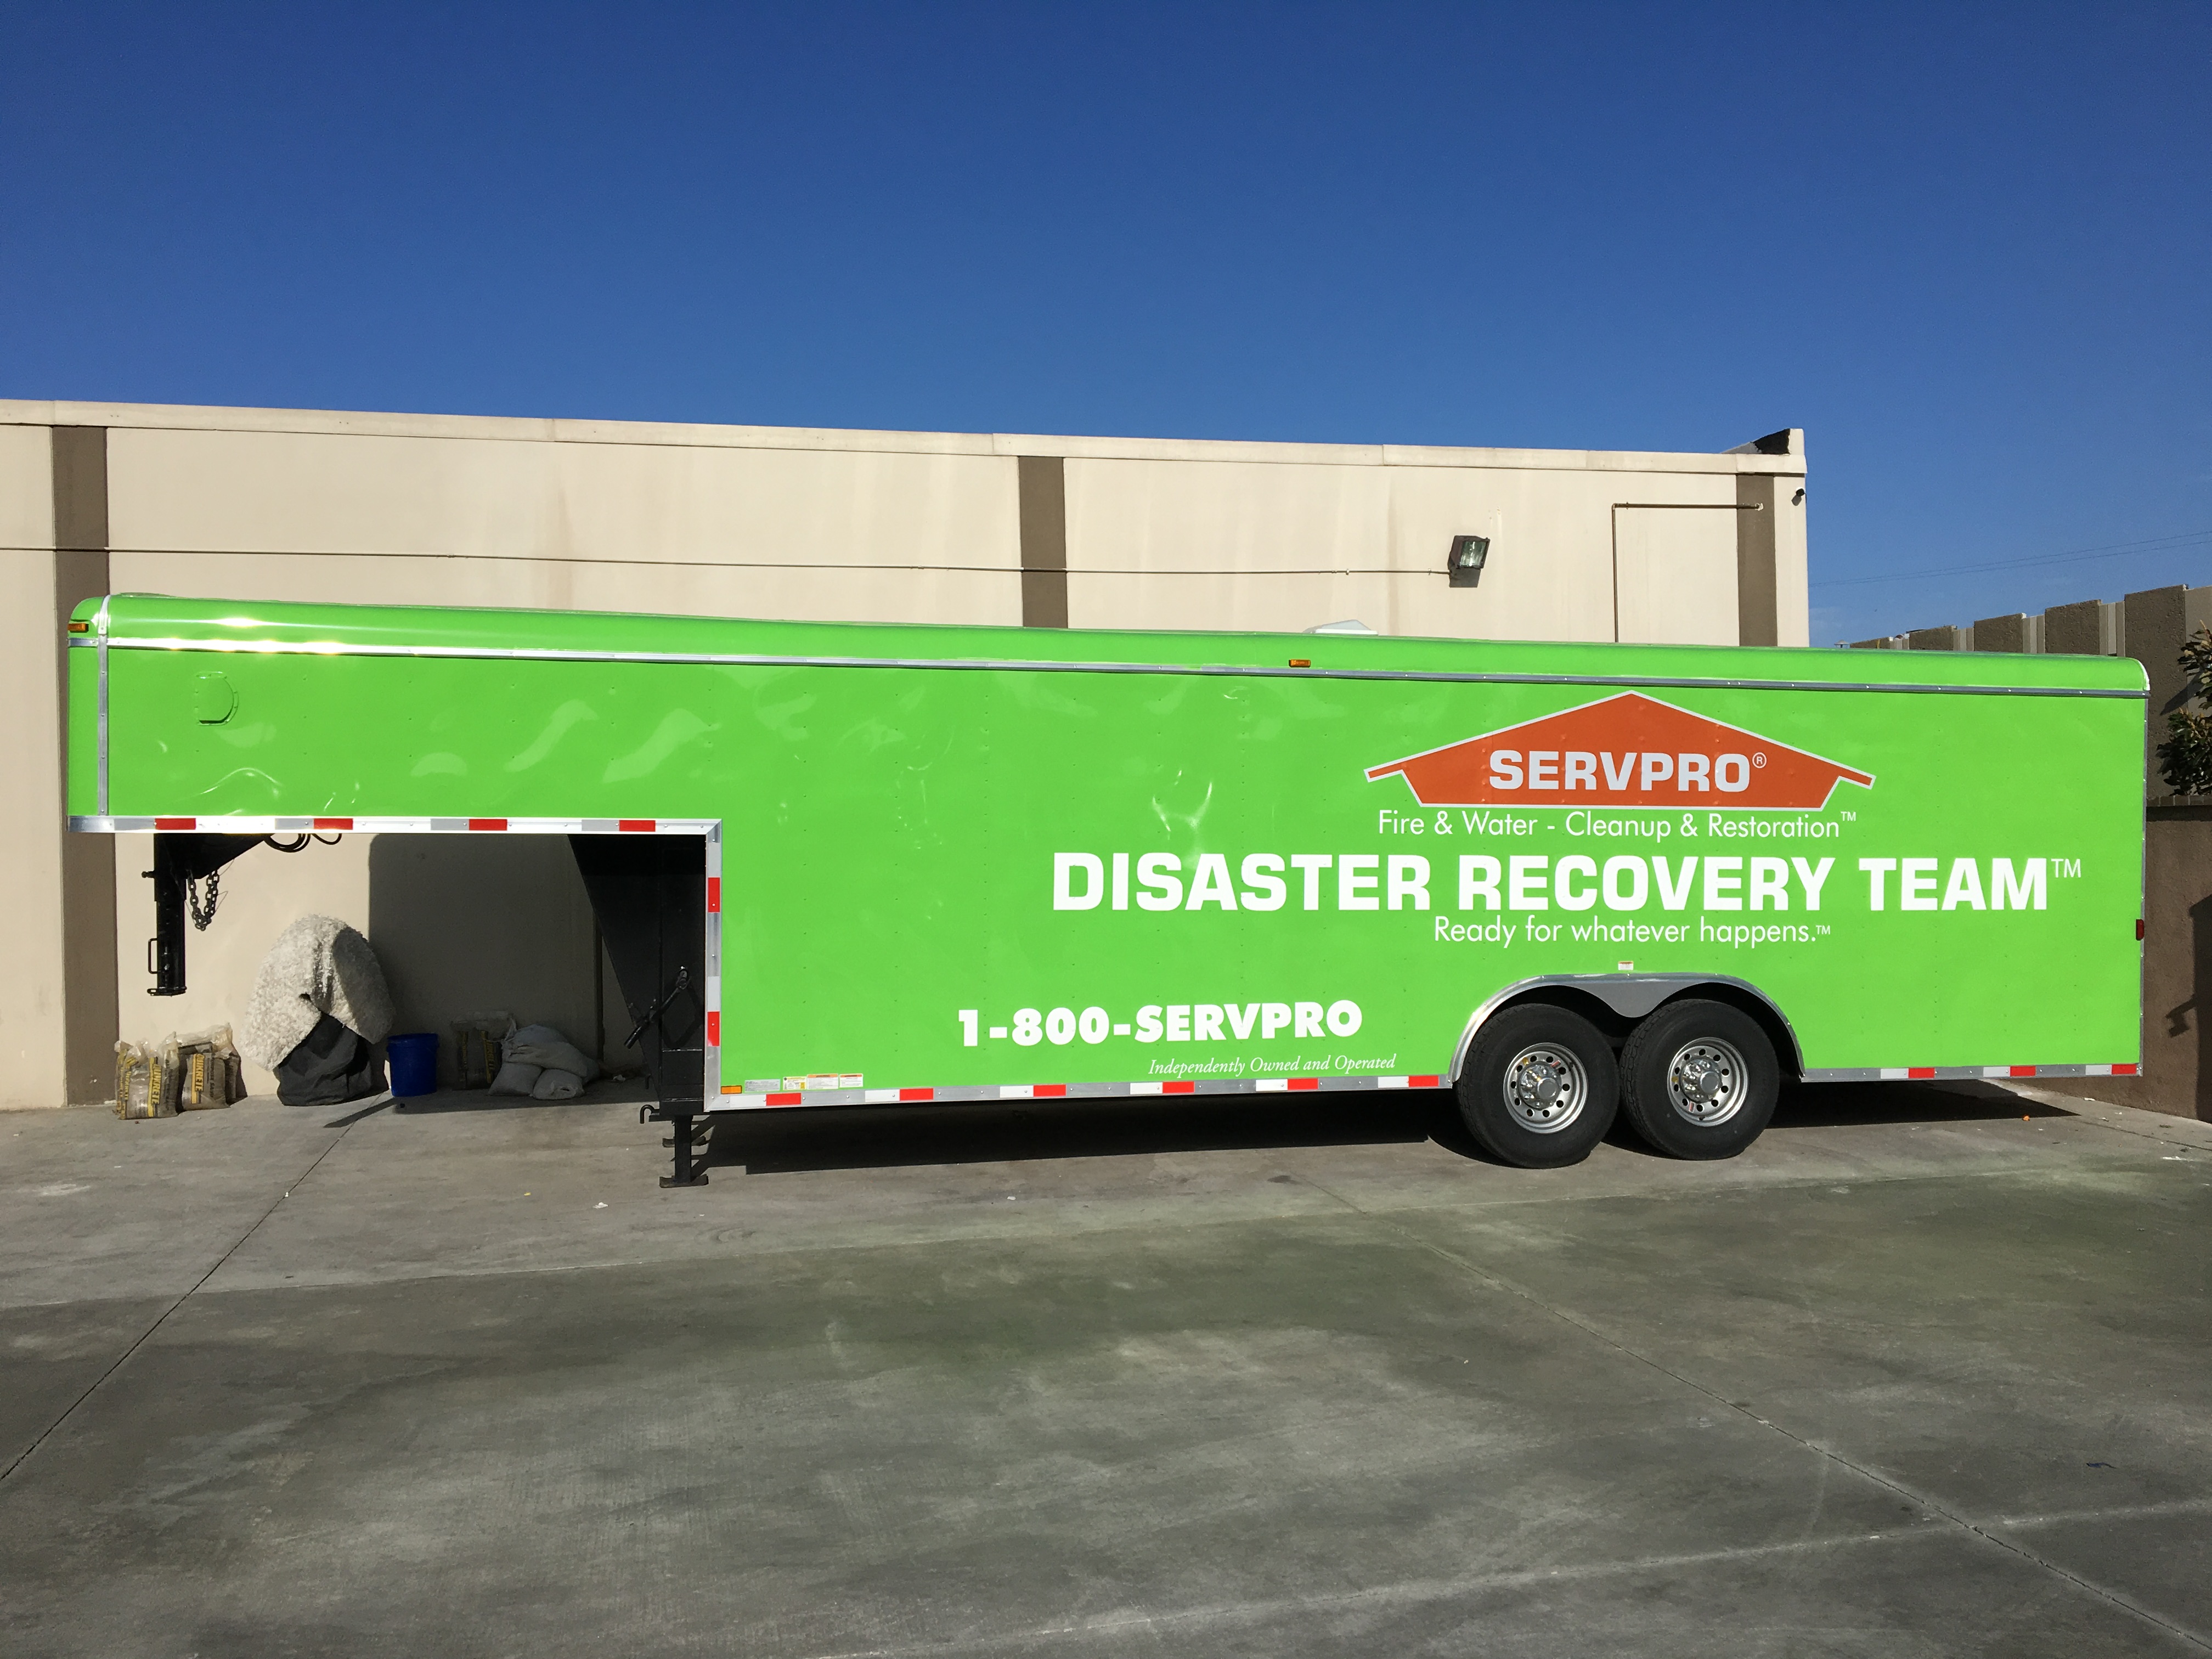 Our Disaster Recovery Team is ALWAYS on standby and ALWAYS ready to respond, 24/7/365.